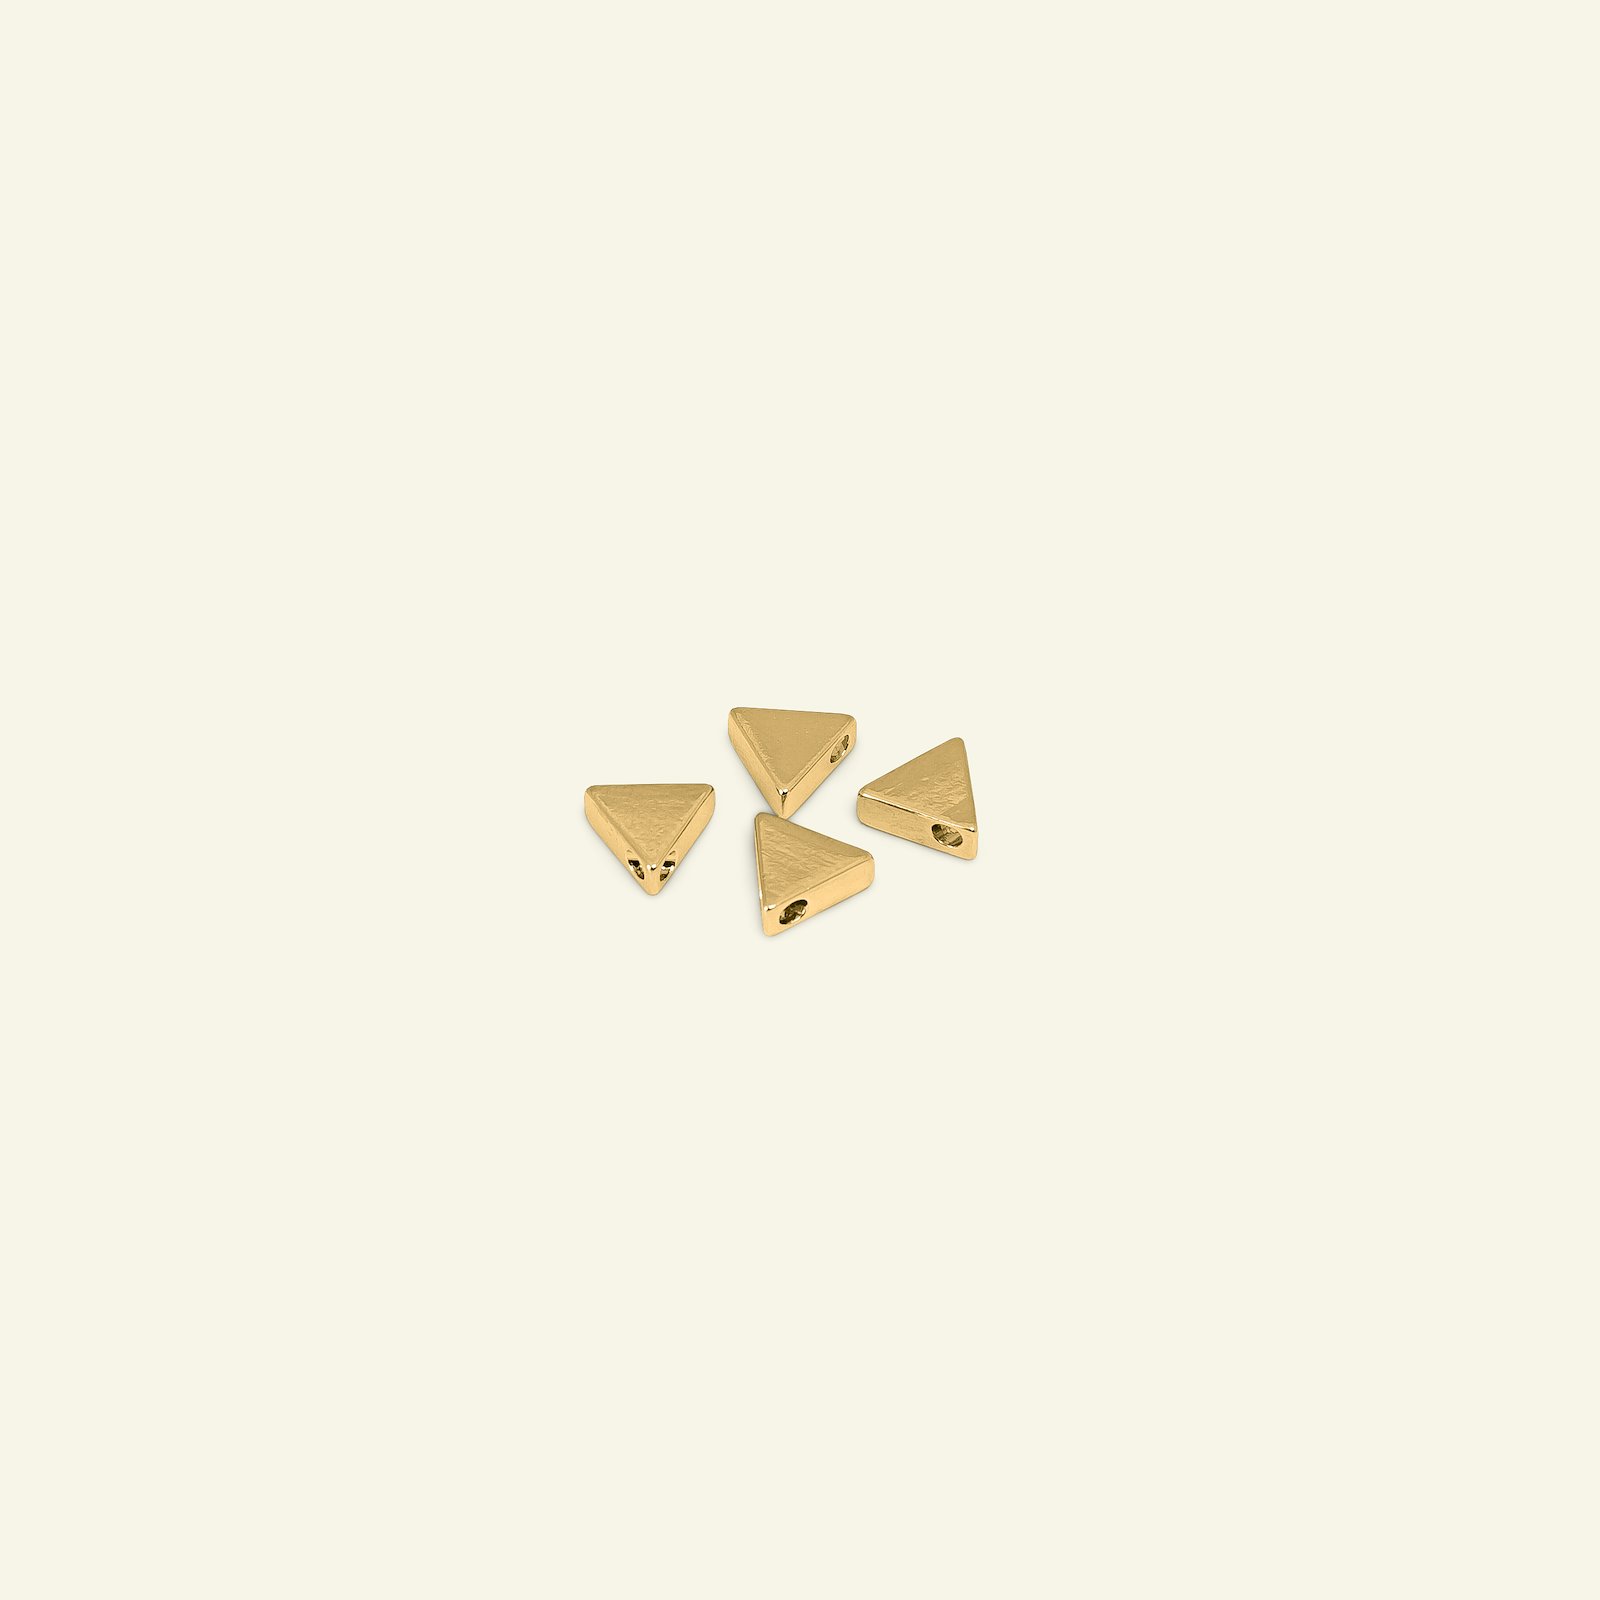 Pendant triangle 7x7mm brass colored 96279_pack